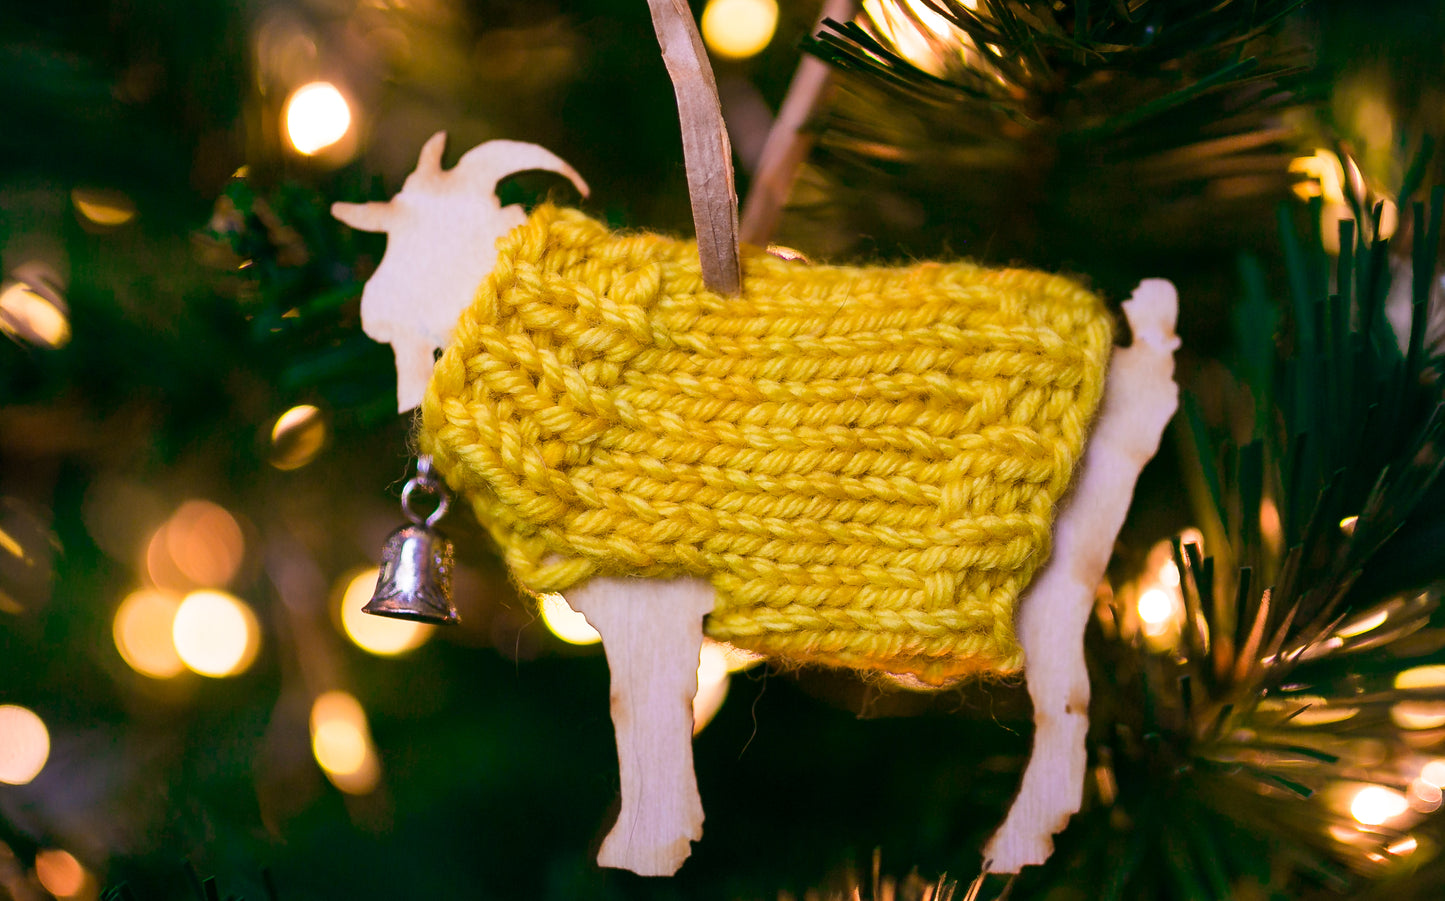 Holiday Decorations Ornaments Goats in Handknit Sweaters